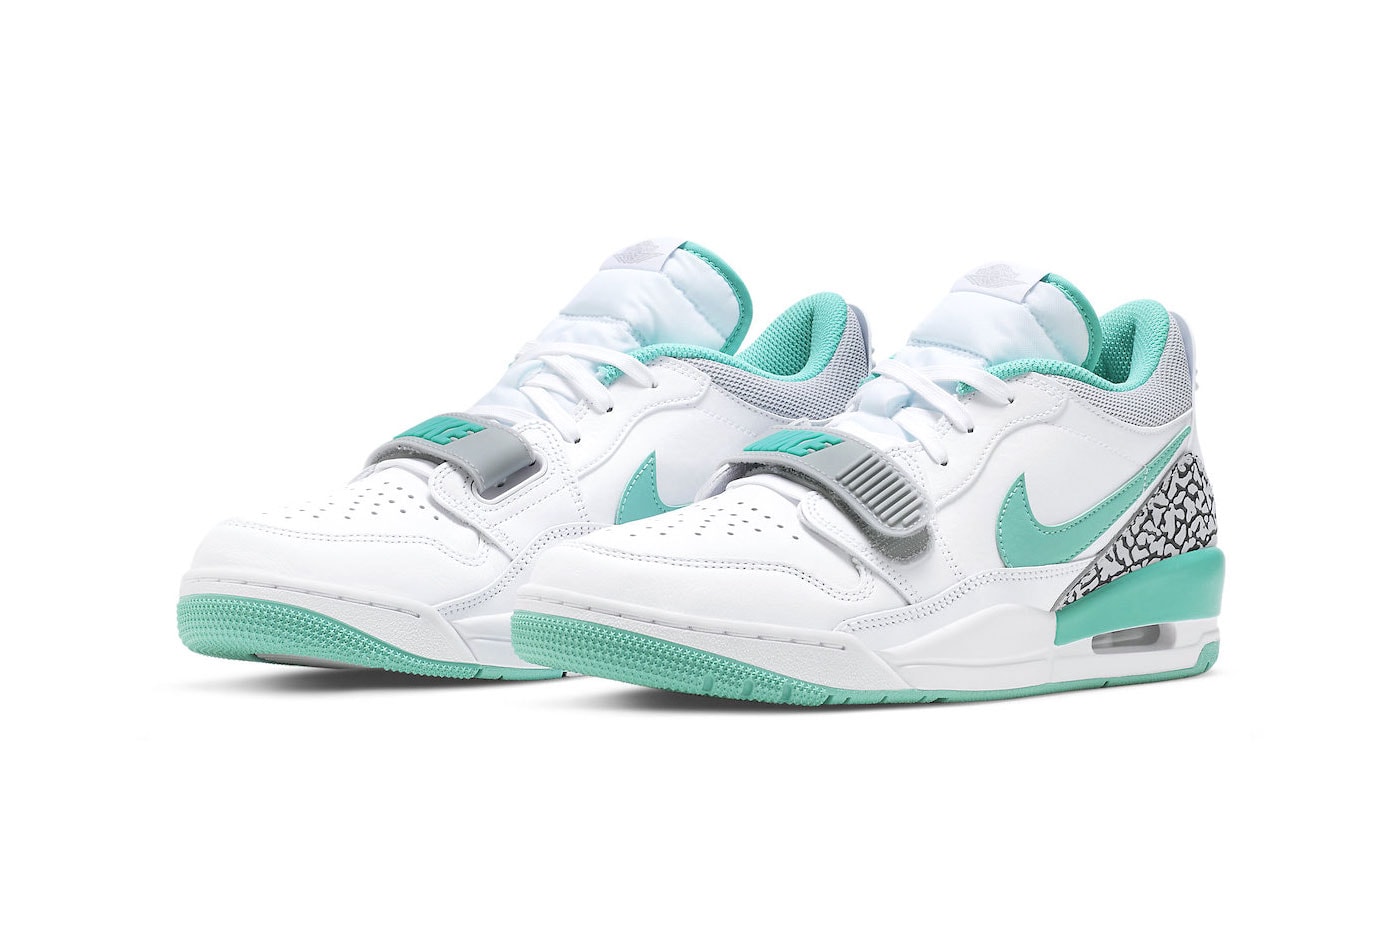 The Air Jordan Legacy 312 Low "Turquoise" Receives a Luxe Tiffany-like Colorway for the Summer white turquoise CD7069-130 nike jordan brand michael jordan